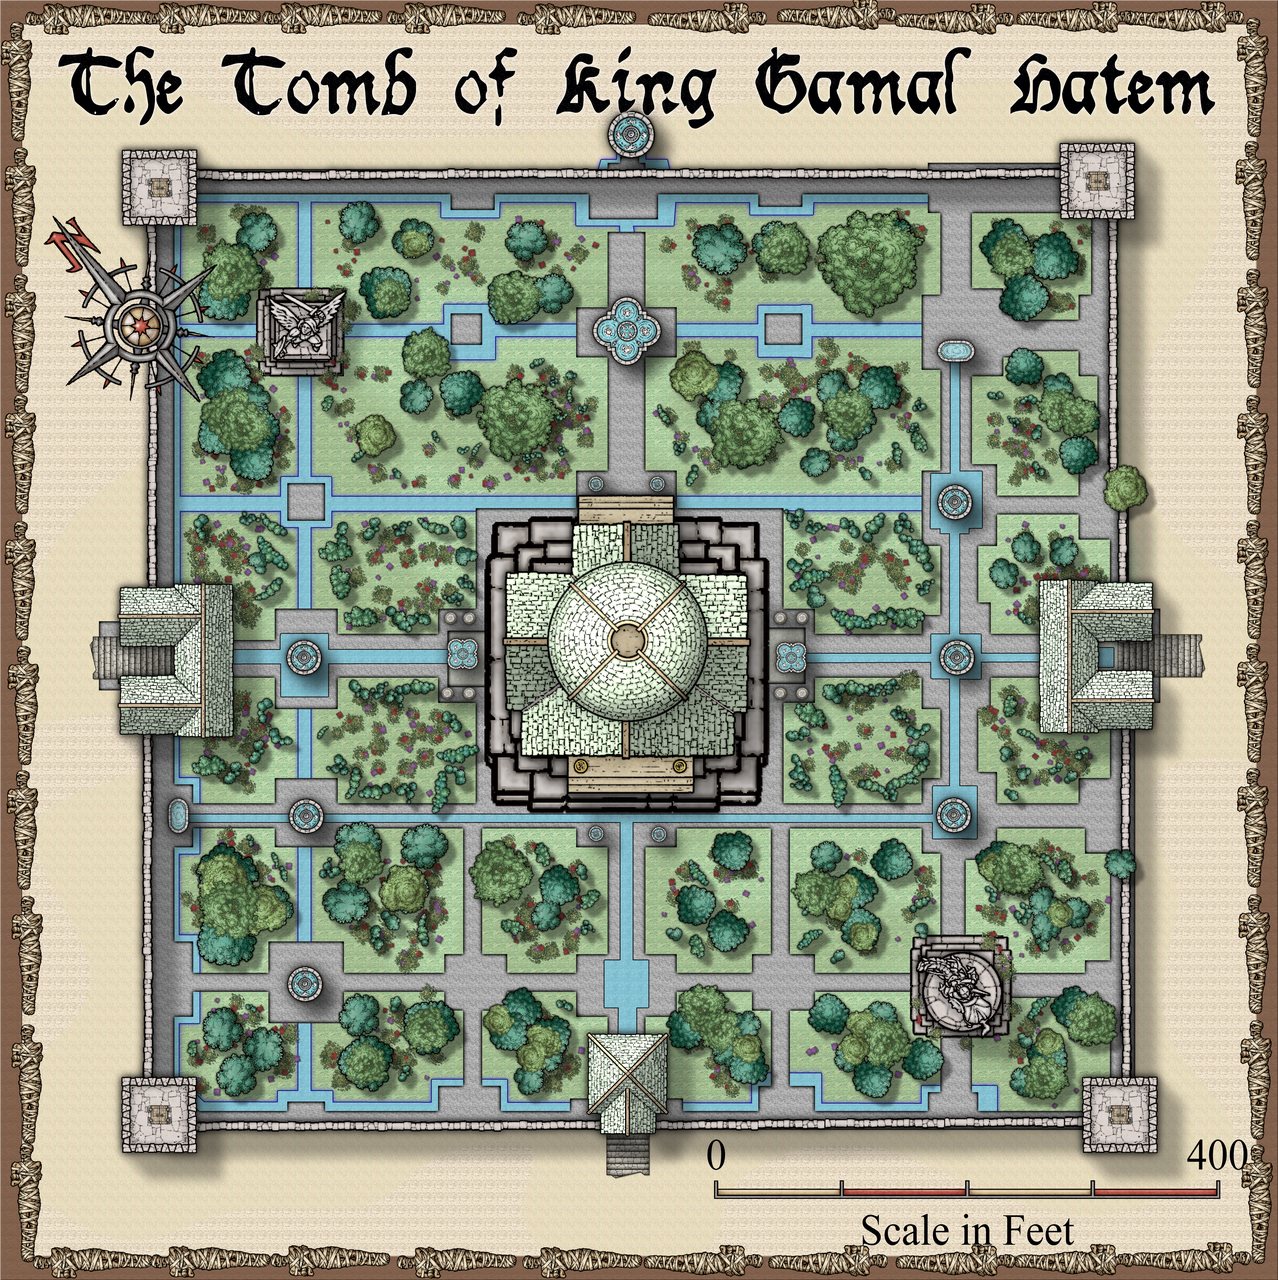 Nibirum Map: tomb of king gamal hatem by Ricko Hasche